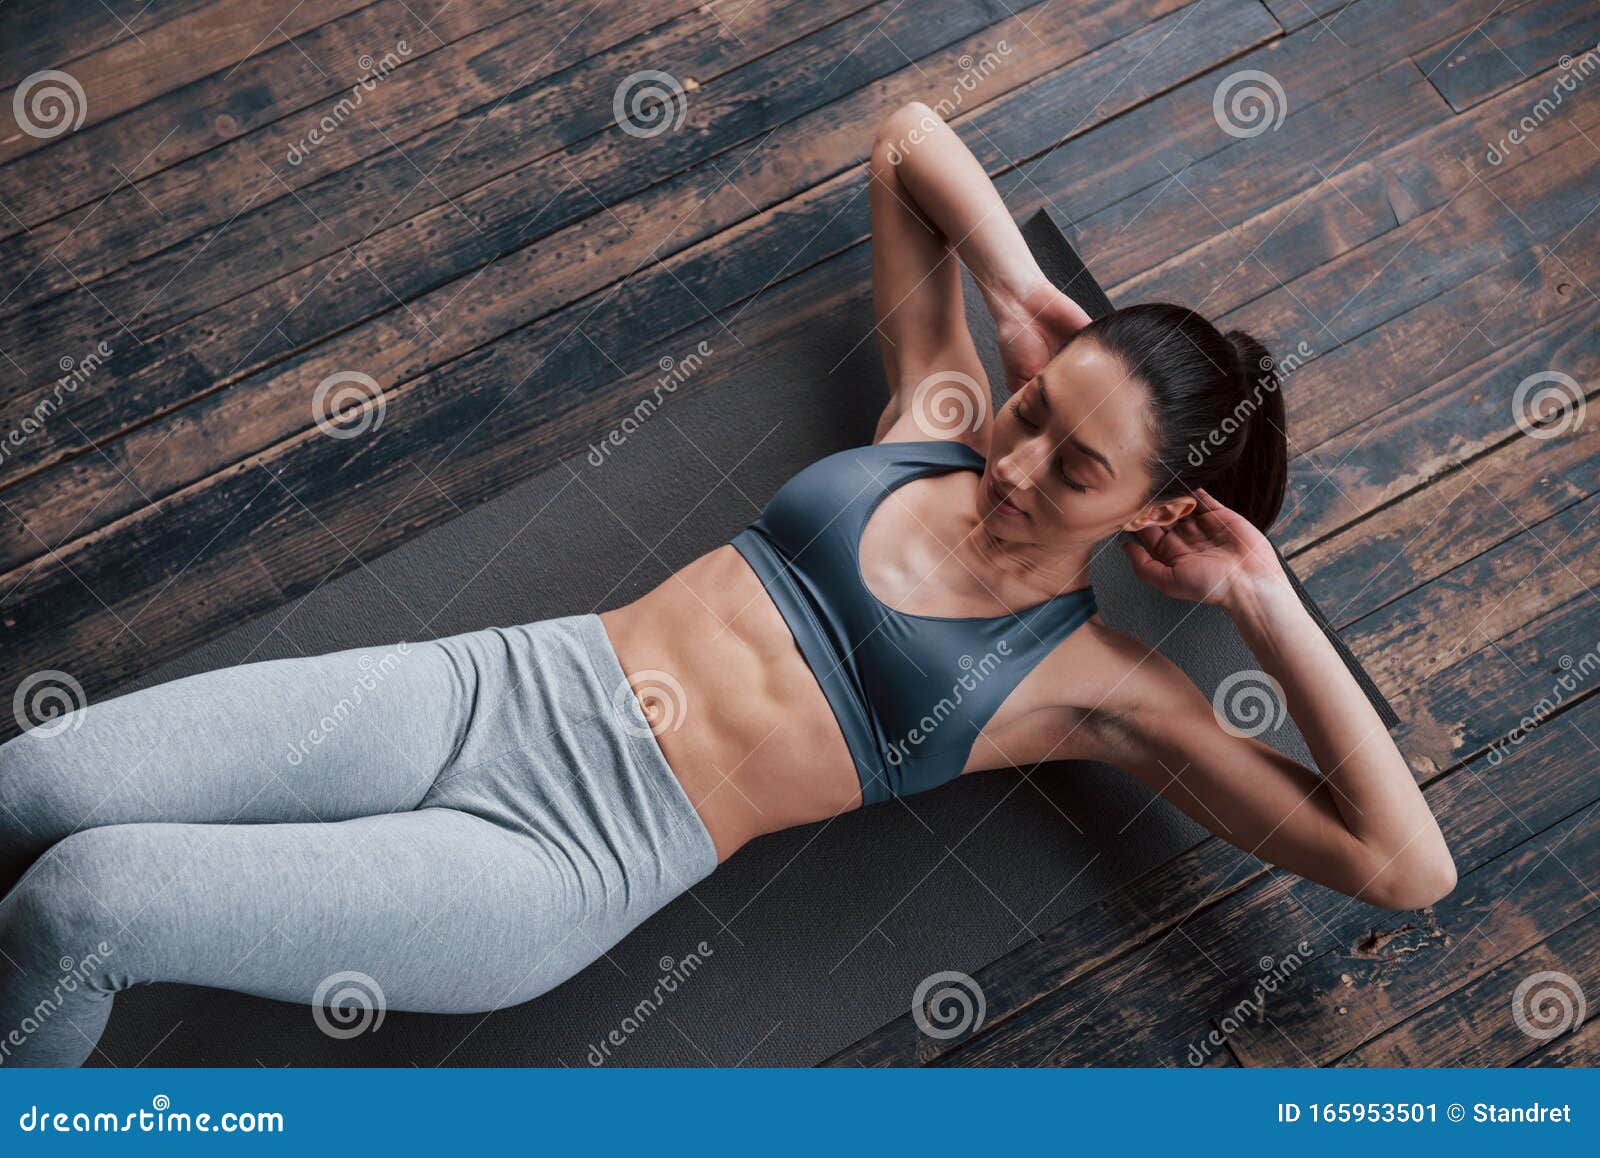 Trainer Have Keep Her Health In Good Condition Top View Of Girl With